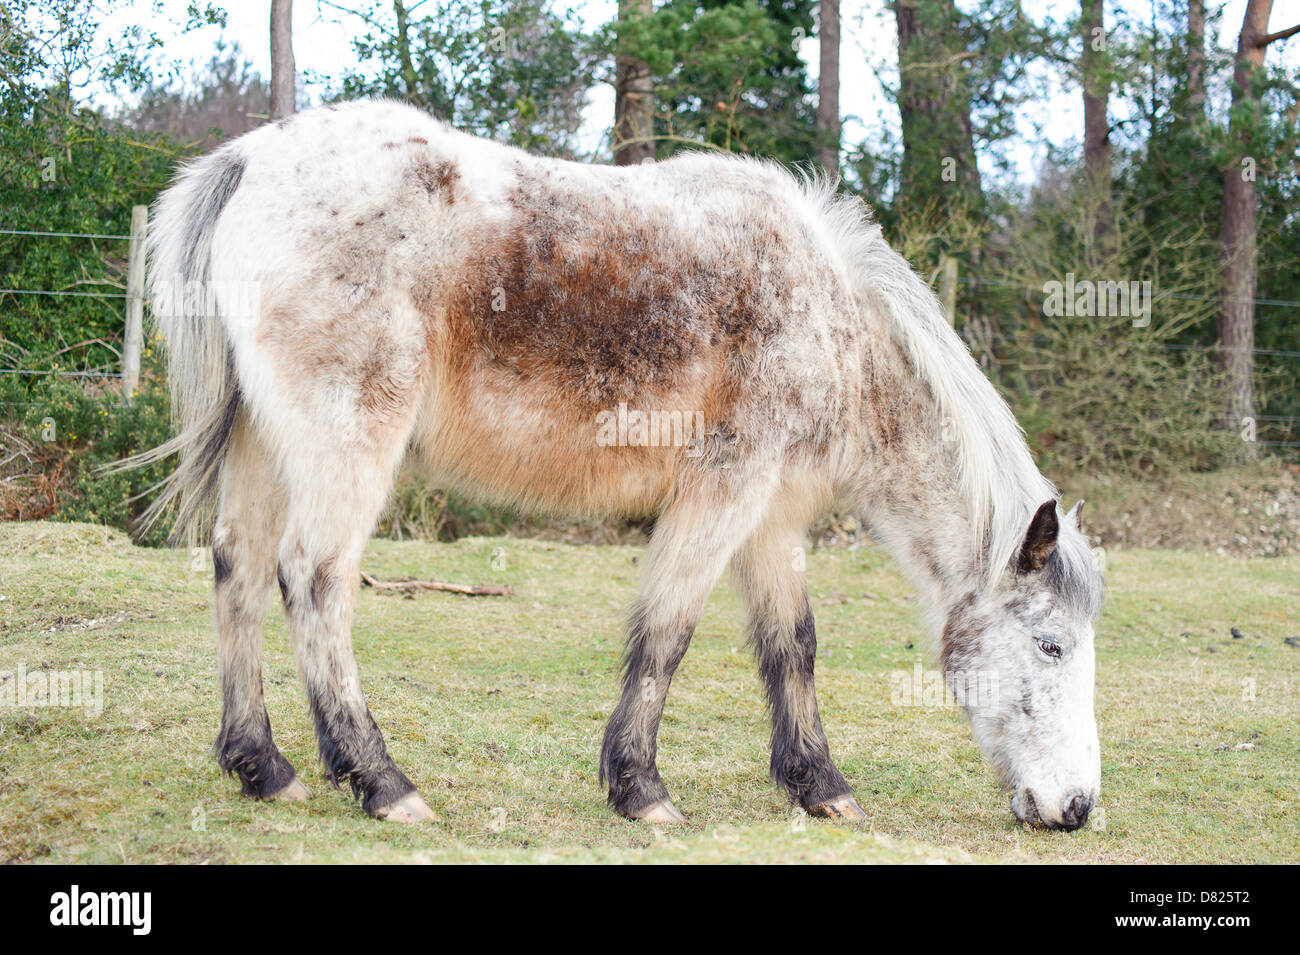 A white New Forest Pony owned by the commoners in the National Park who have the right to let their animals graze in the New forest. Stock Photo